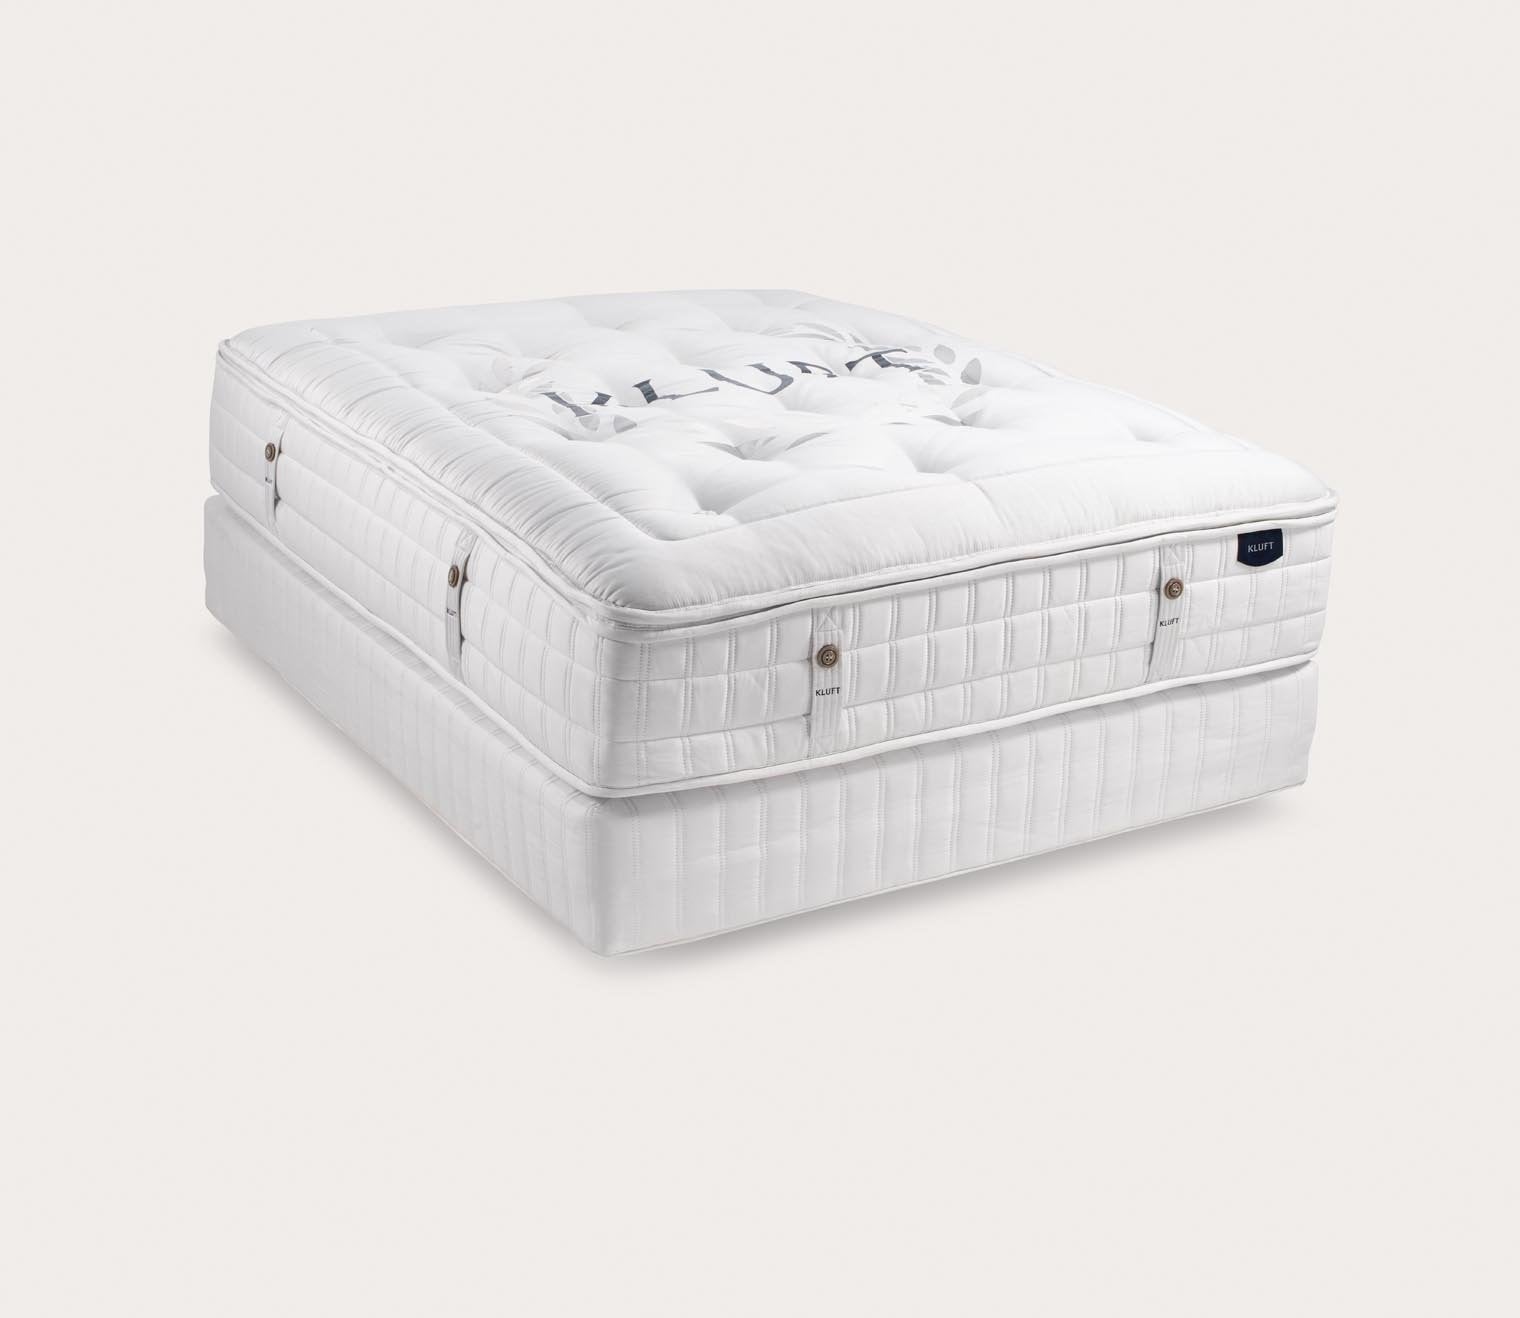 Royal Ascent Luxetop Mattress by Kluft